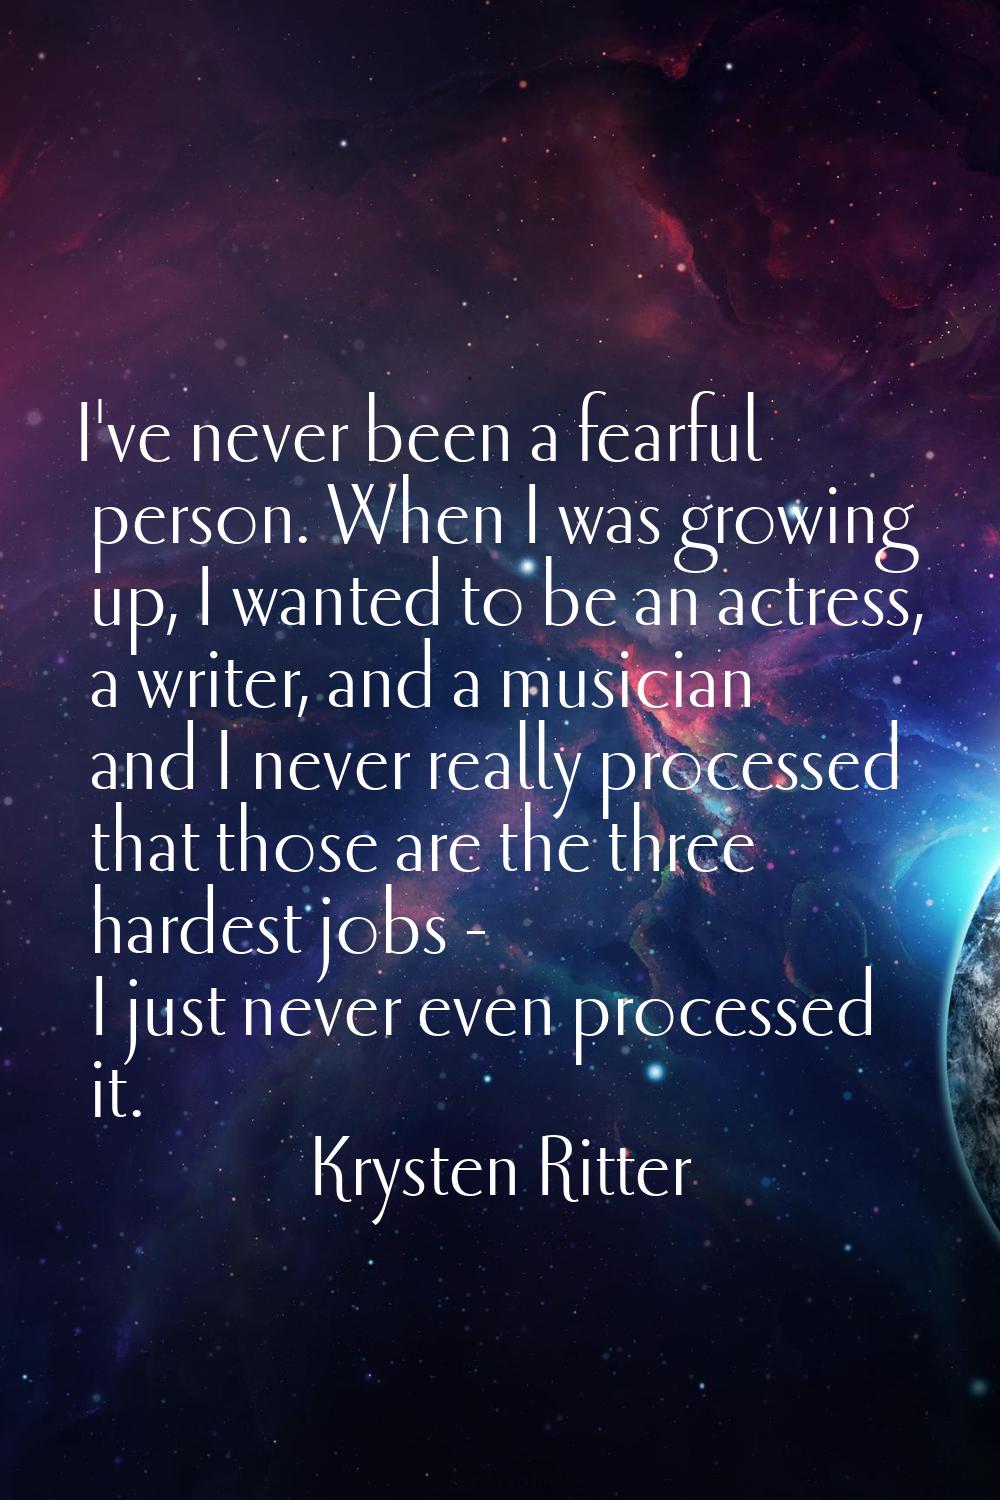 I've never been a fearful person. When I was growing up, I wanted to be an actress, a writer, and a